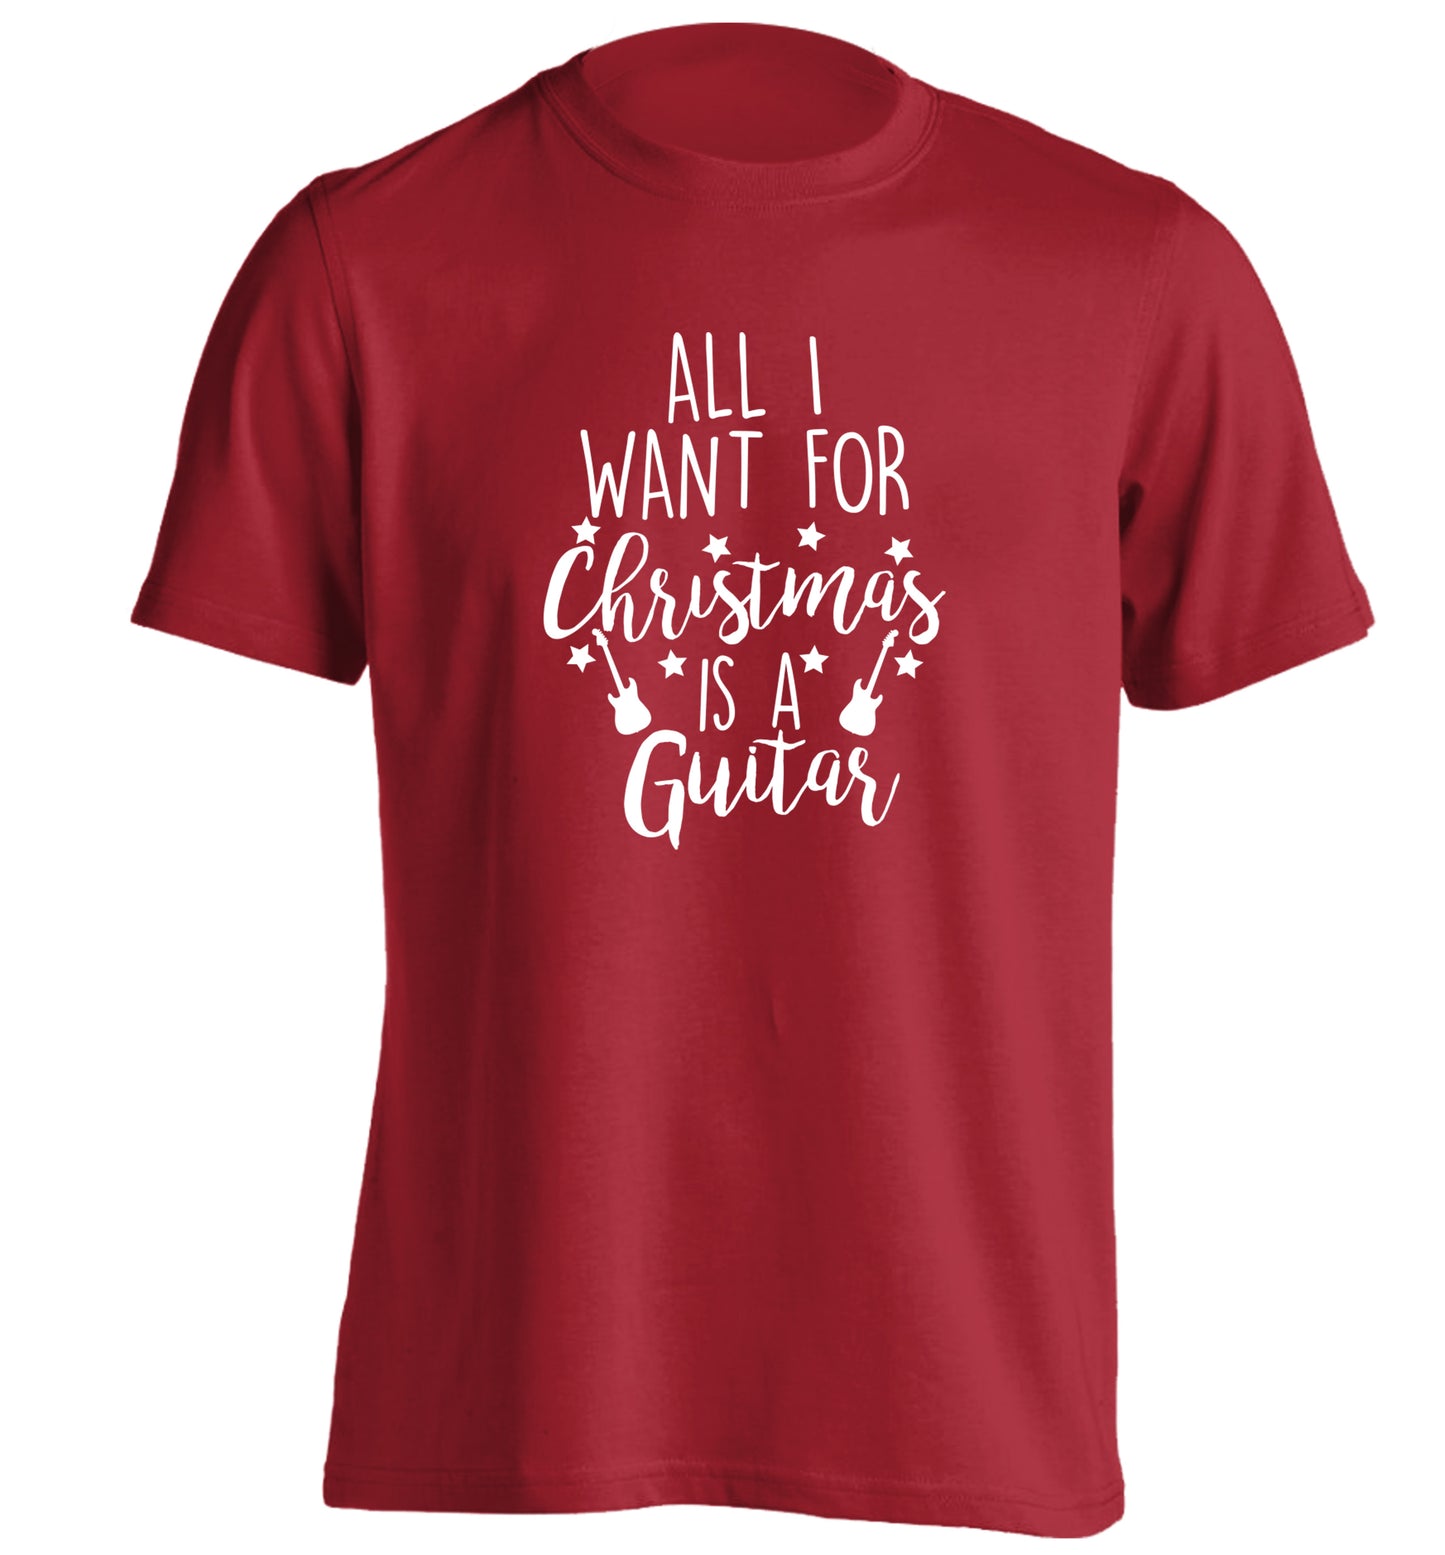 All I want for Christmas is a guitar adults unisex red Tshirt 2XL